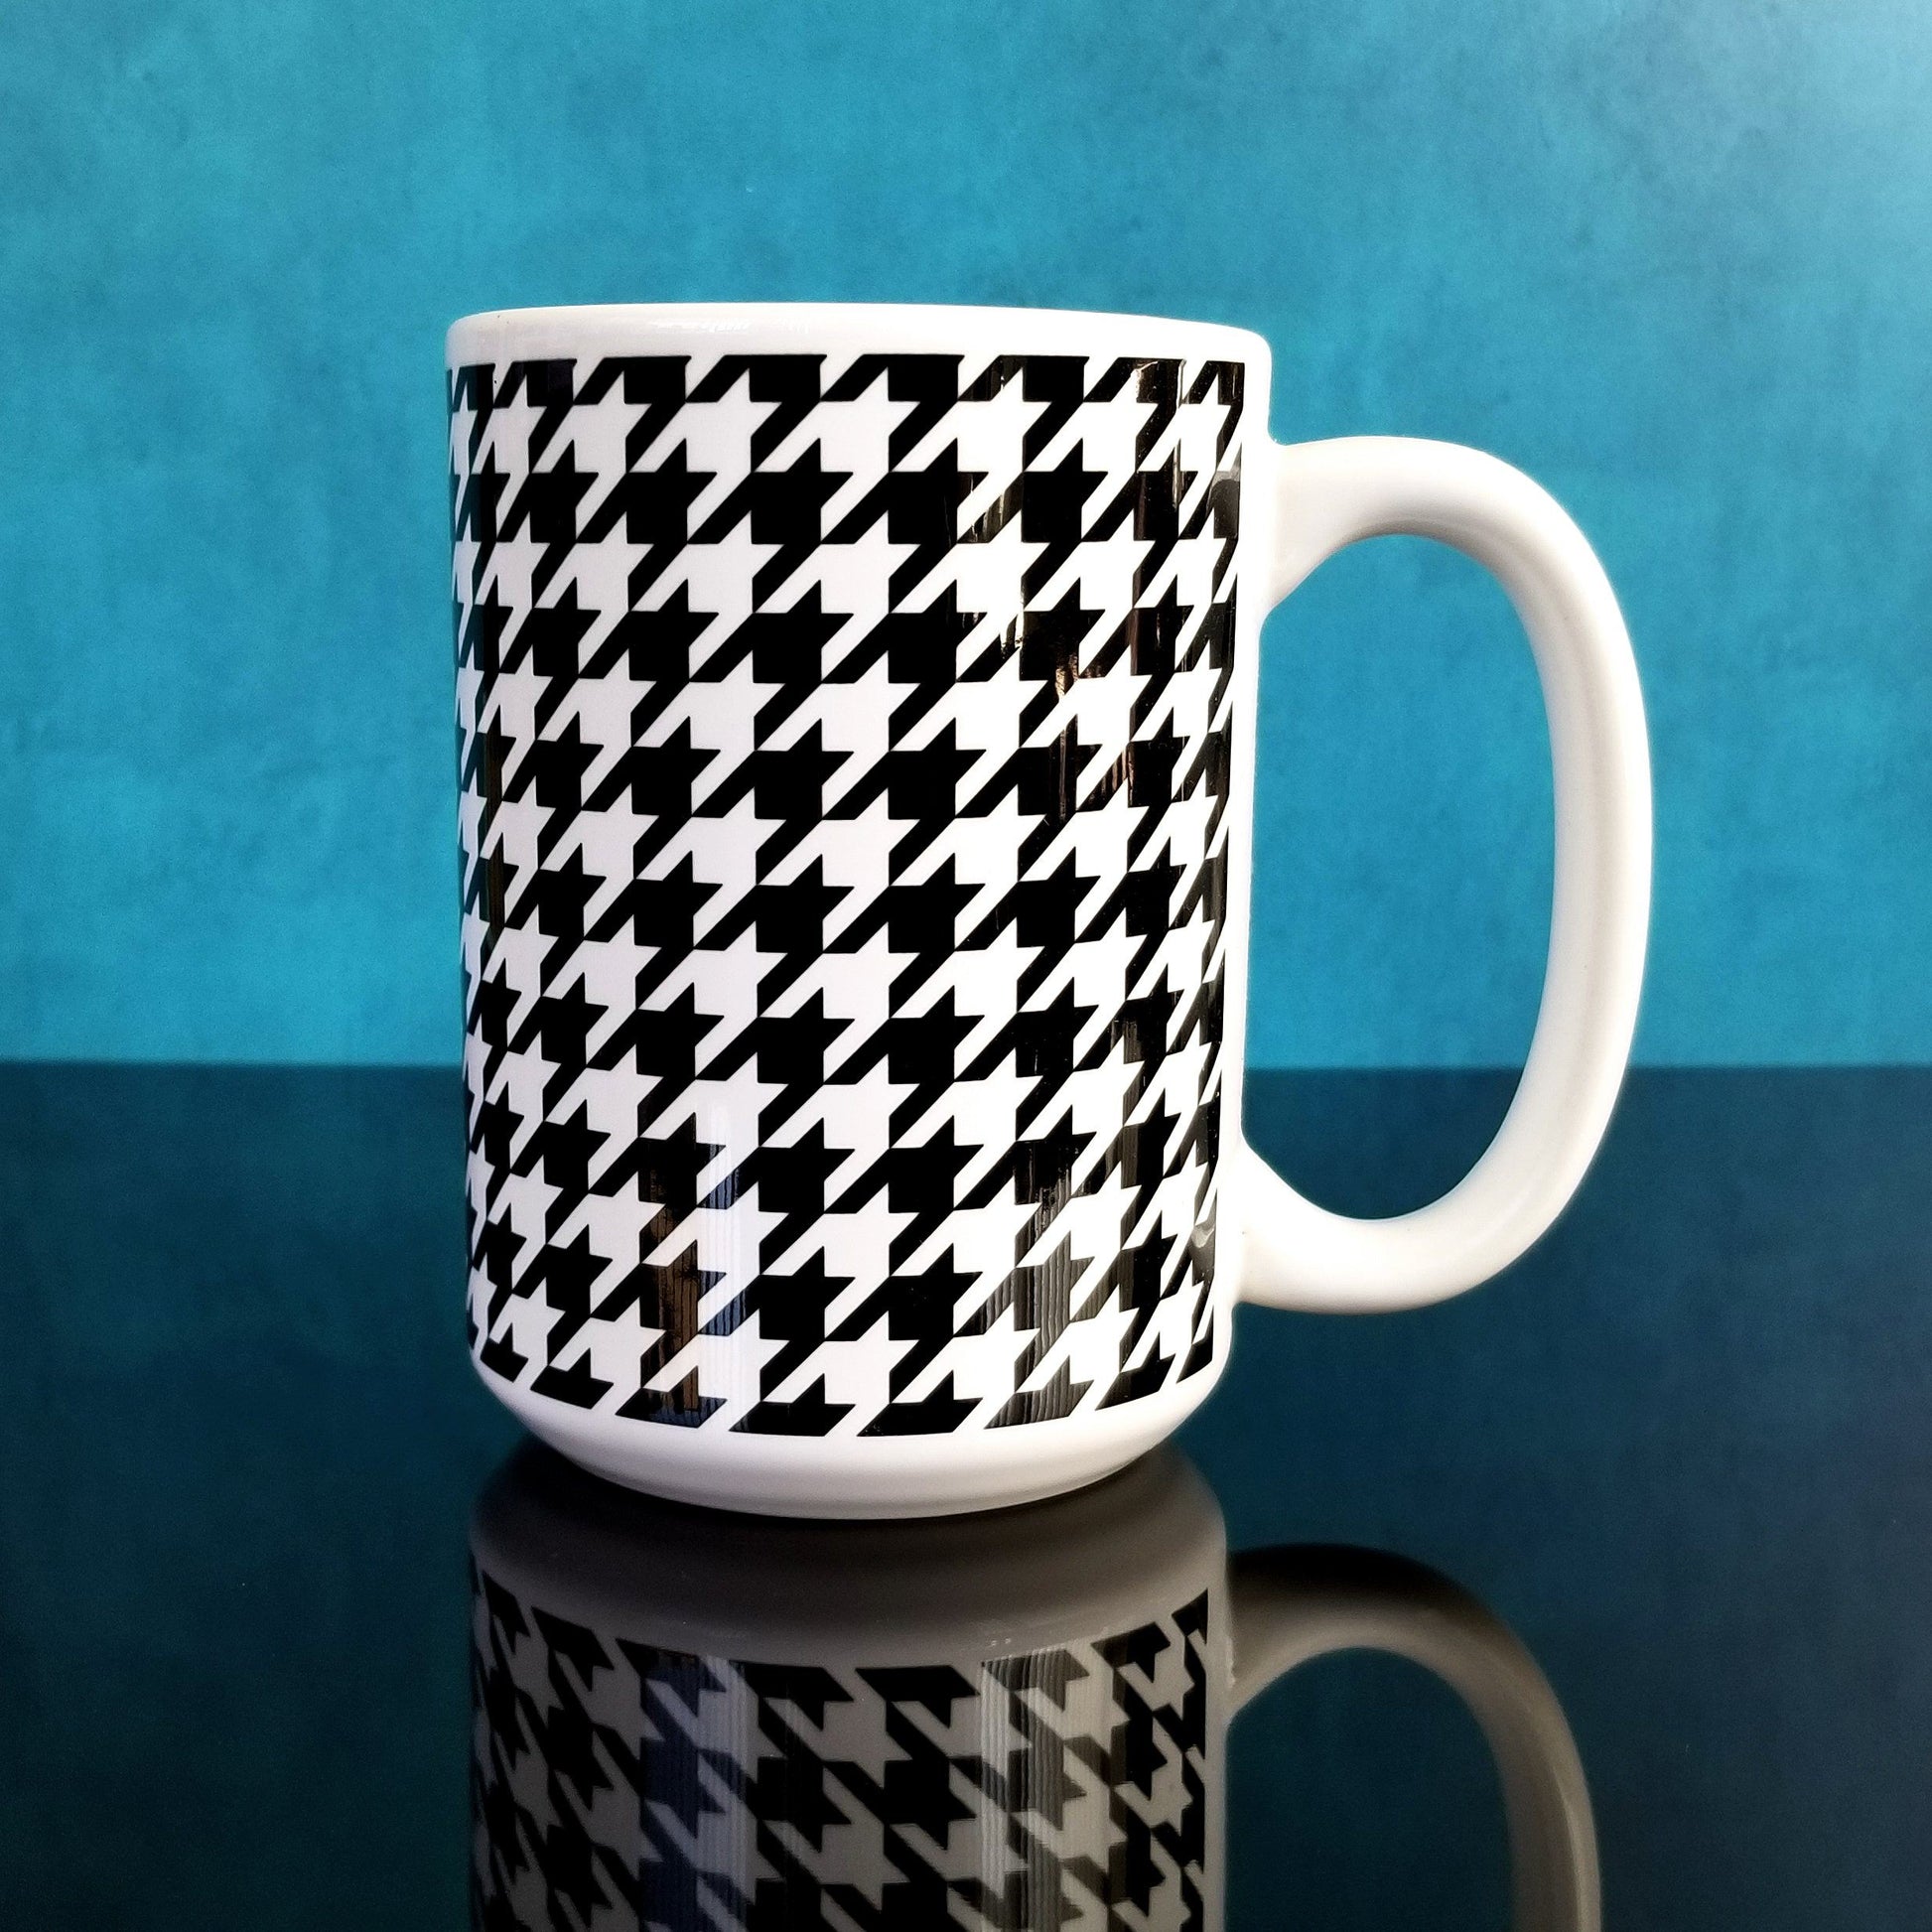 Black and White Houndstooth Mug (15oz, on blue and glossy black background) at Amy's Coffee Mugs